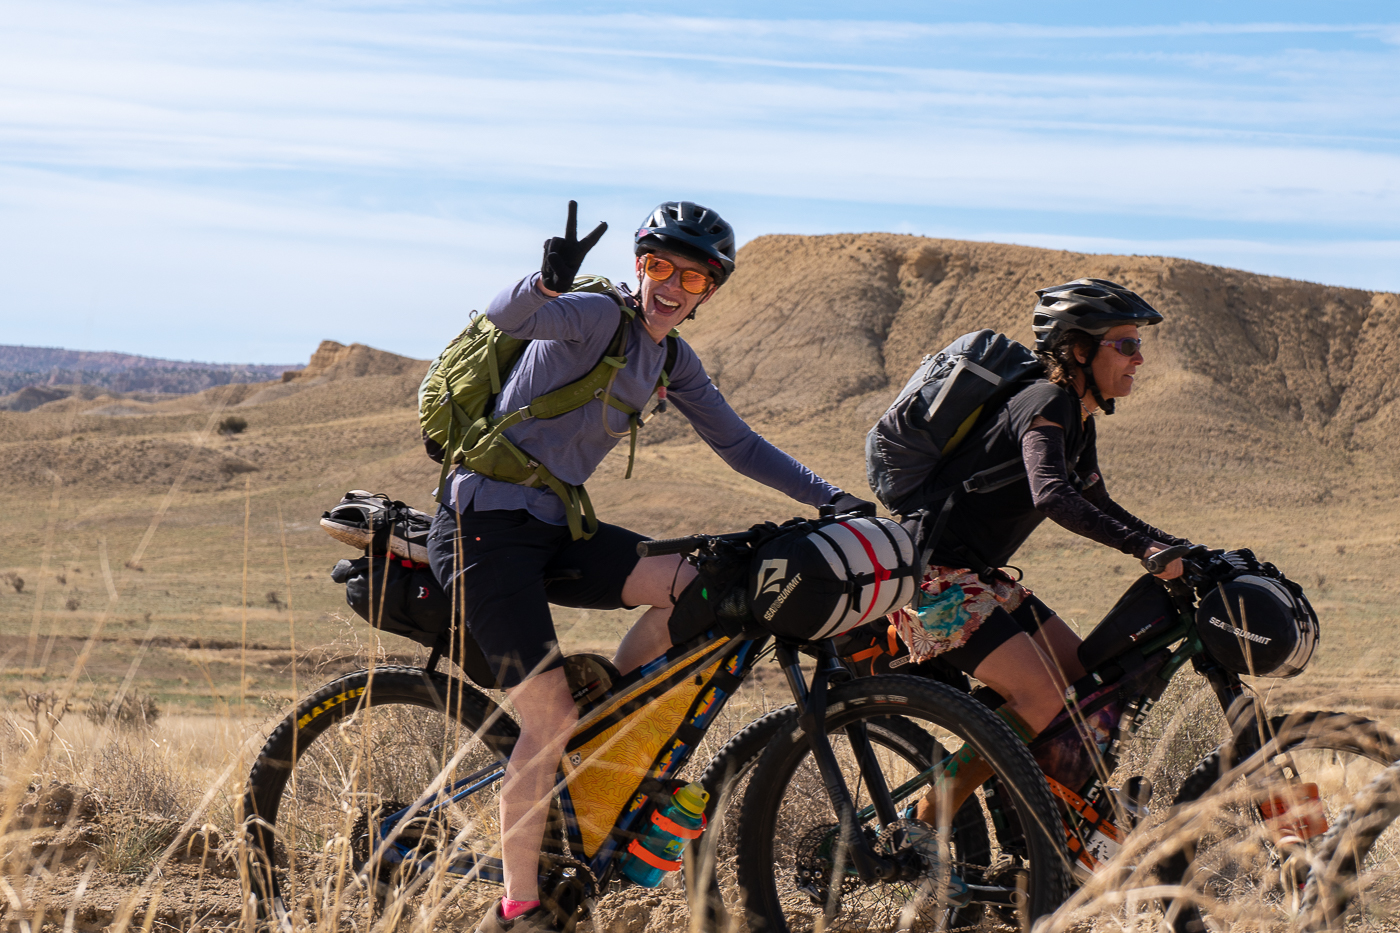 Bikepacking Roots Announces Community Roots and Regional Stewardship Programs